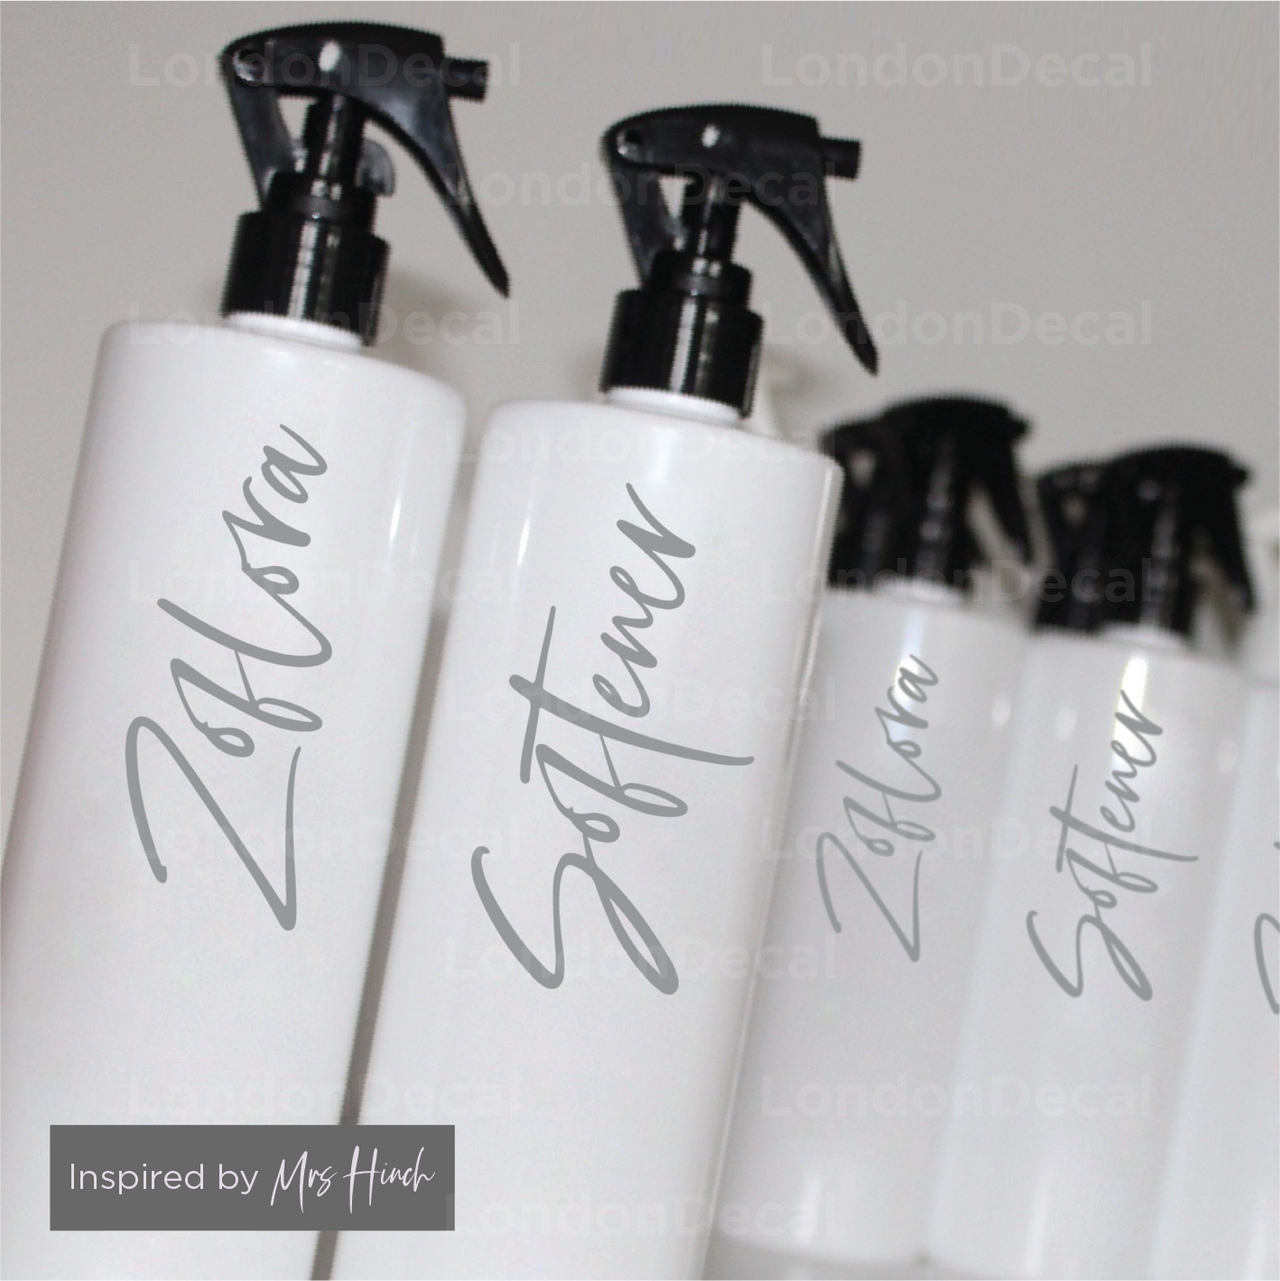 ZOFLORA AND SOFTENER - Mrs Hinch inspired spray bottle decals (Type 2)